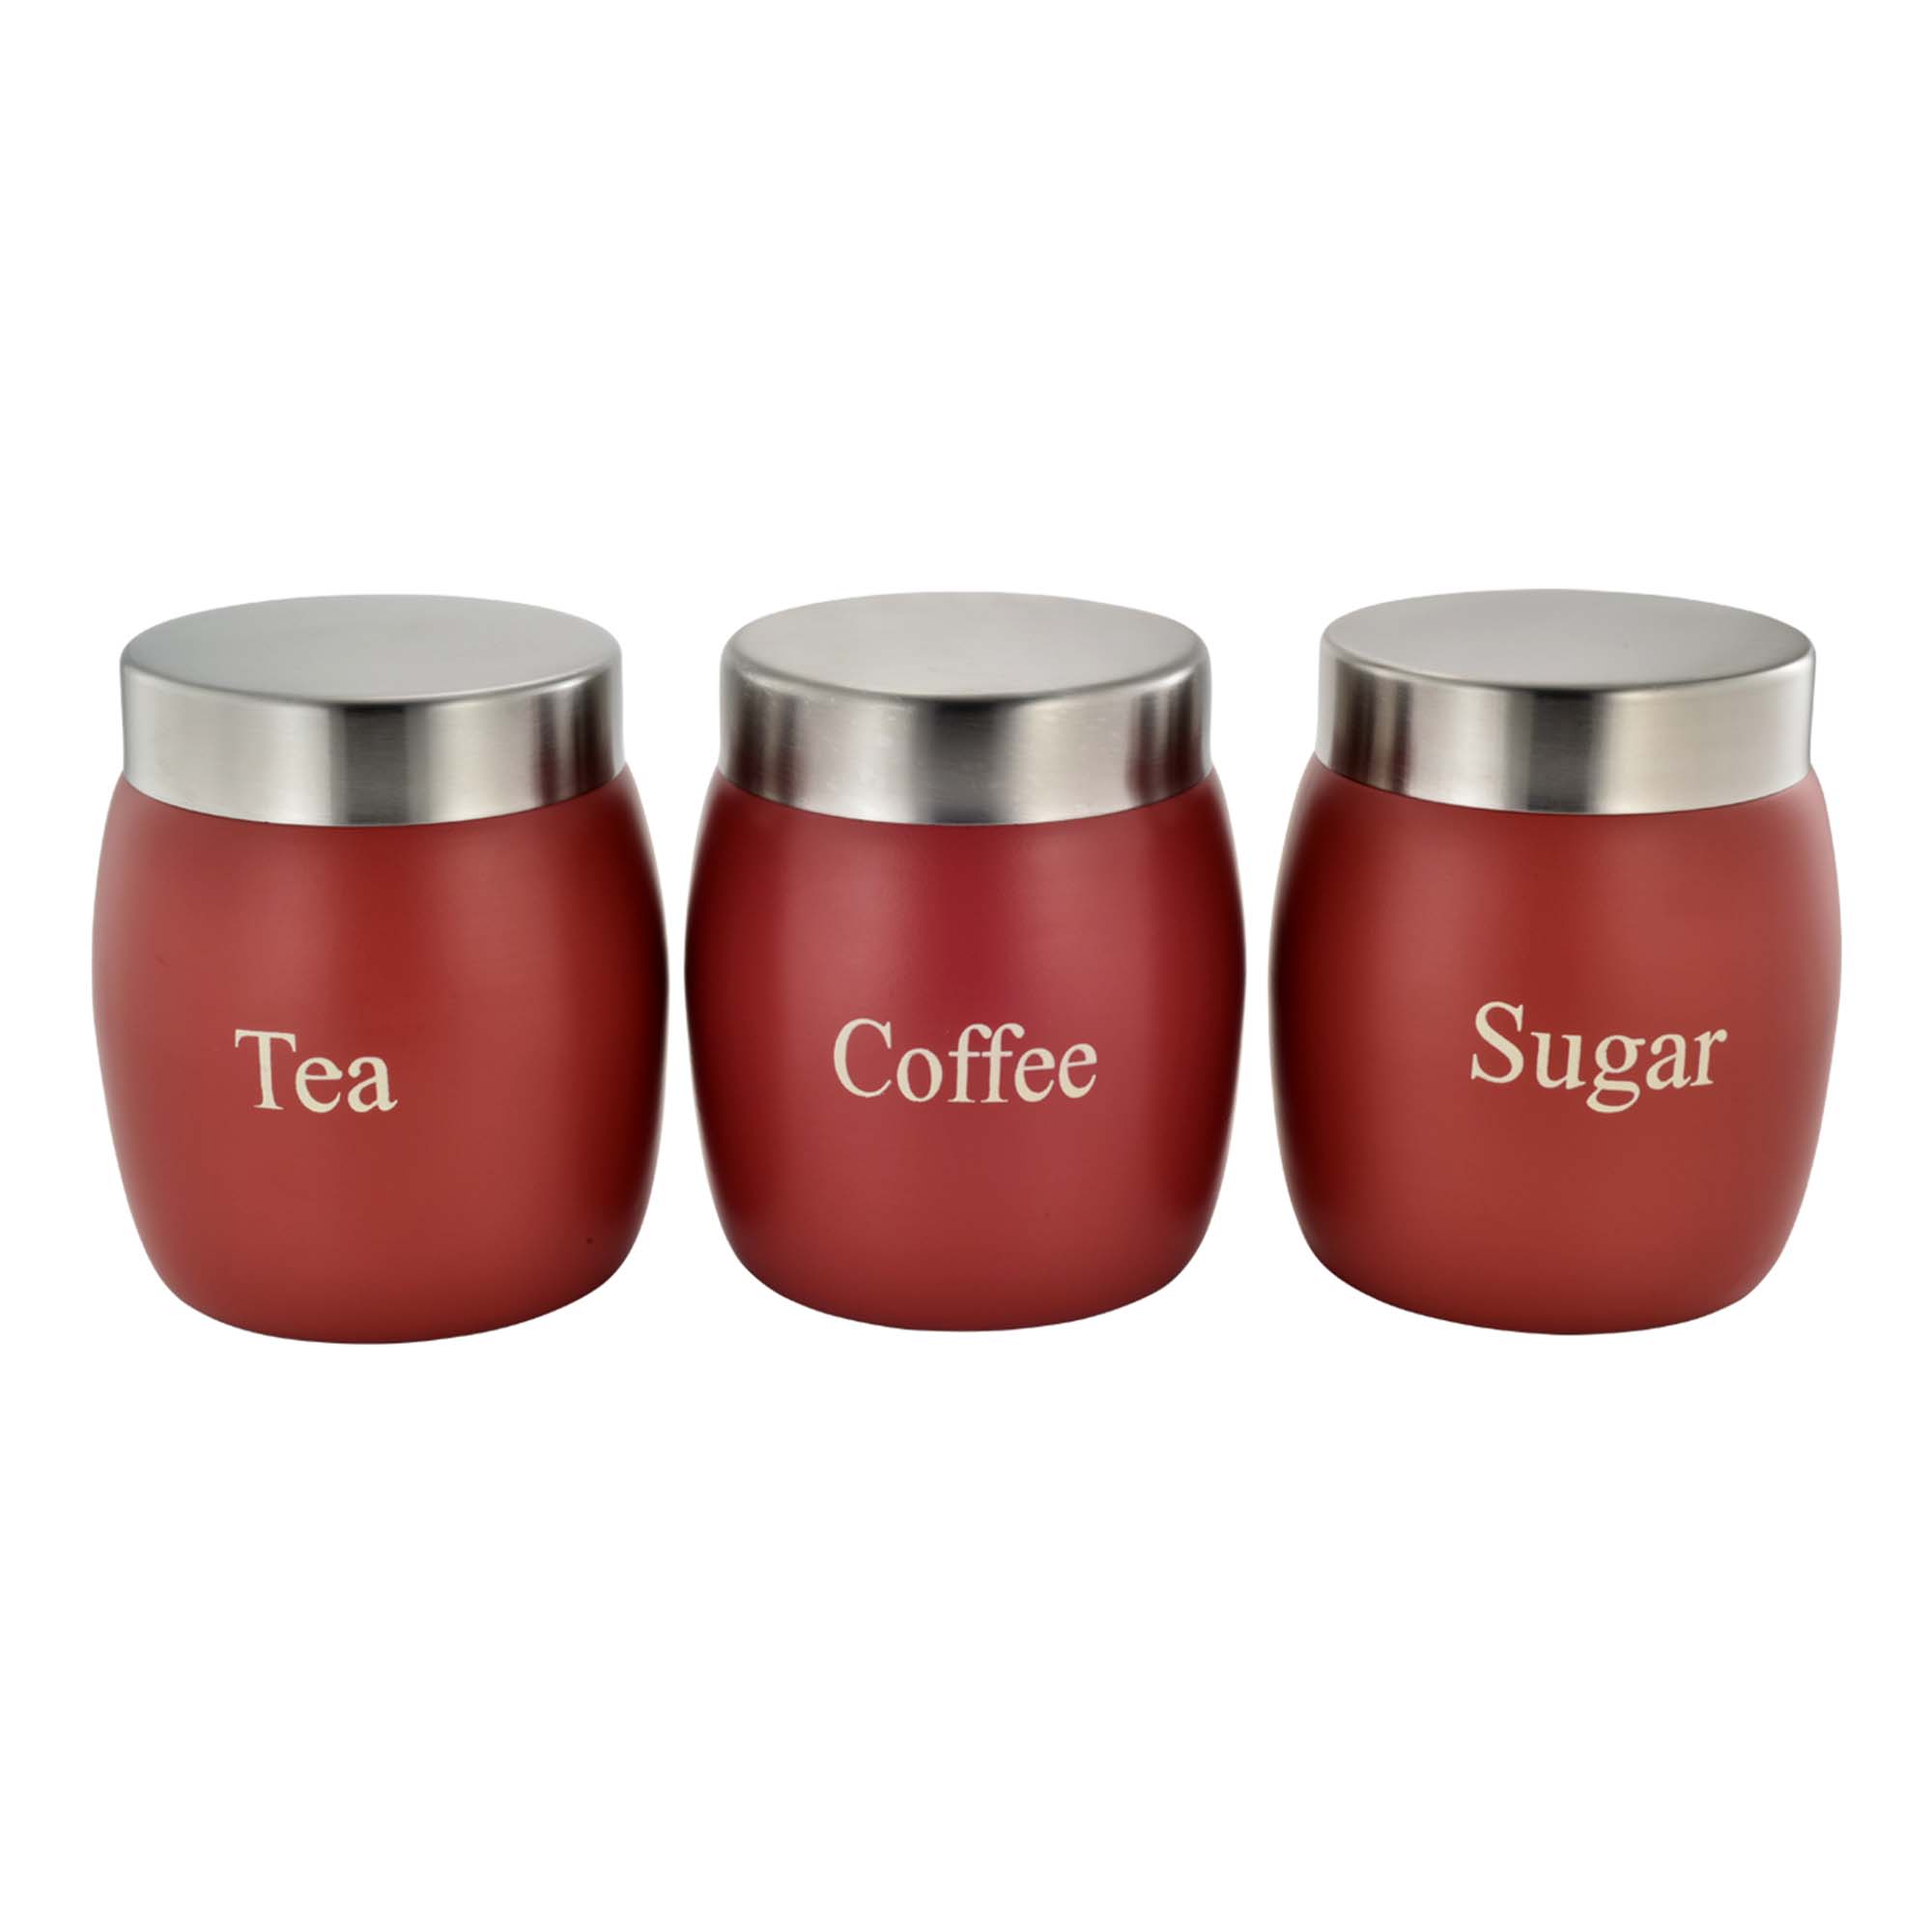 Vintage Tin Canister Set Tea-Coffee-Sugar Barrel Shaped Jar Red with S/S Lid 3pc